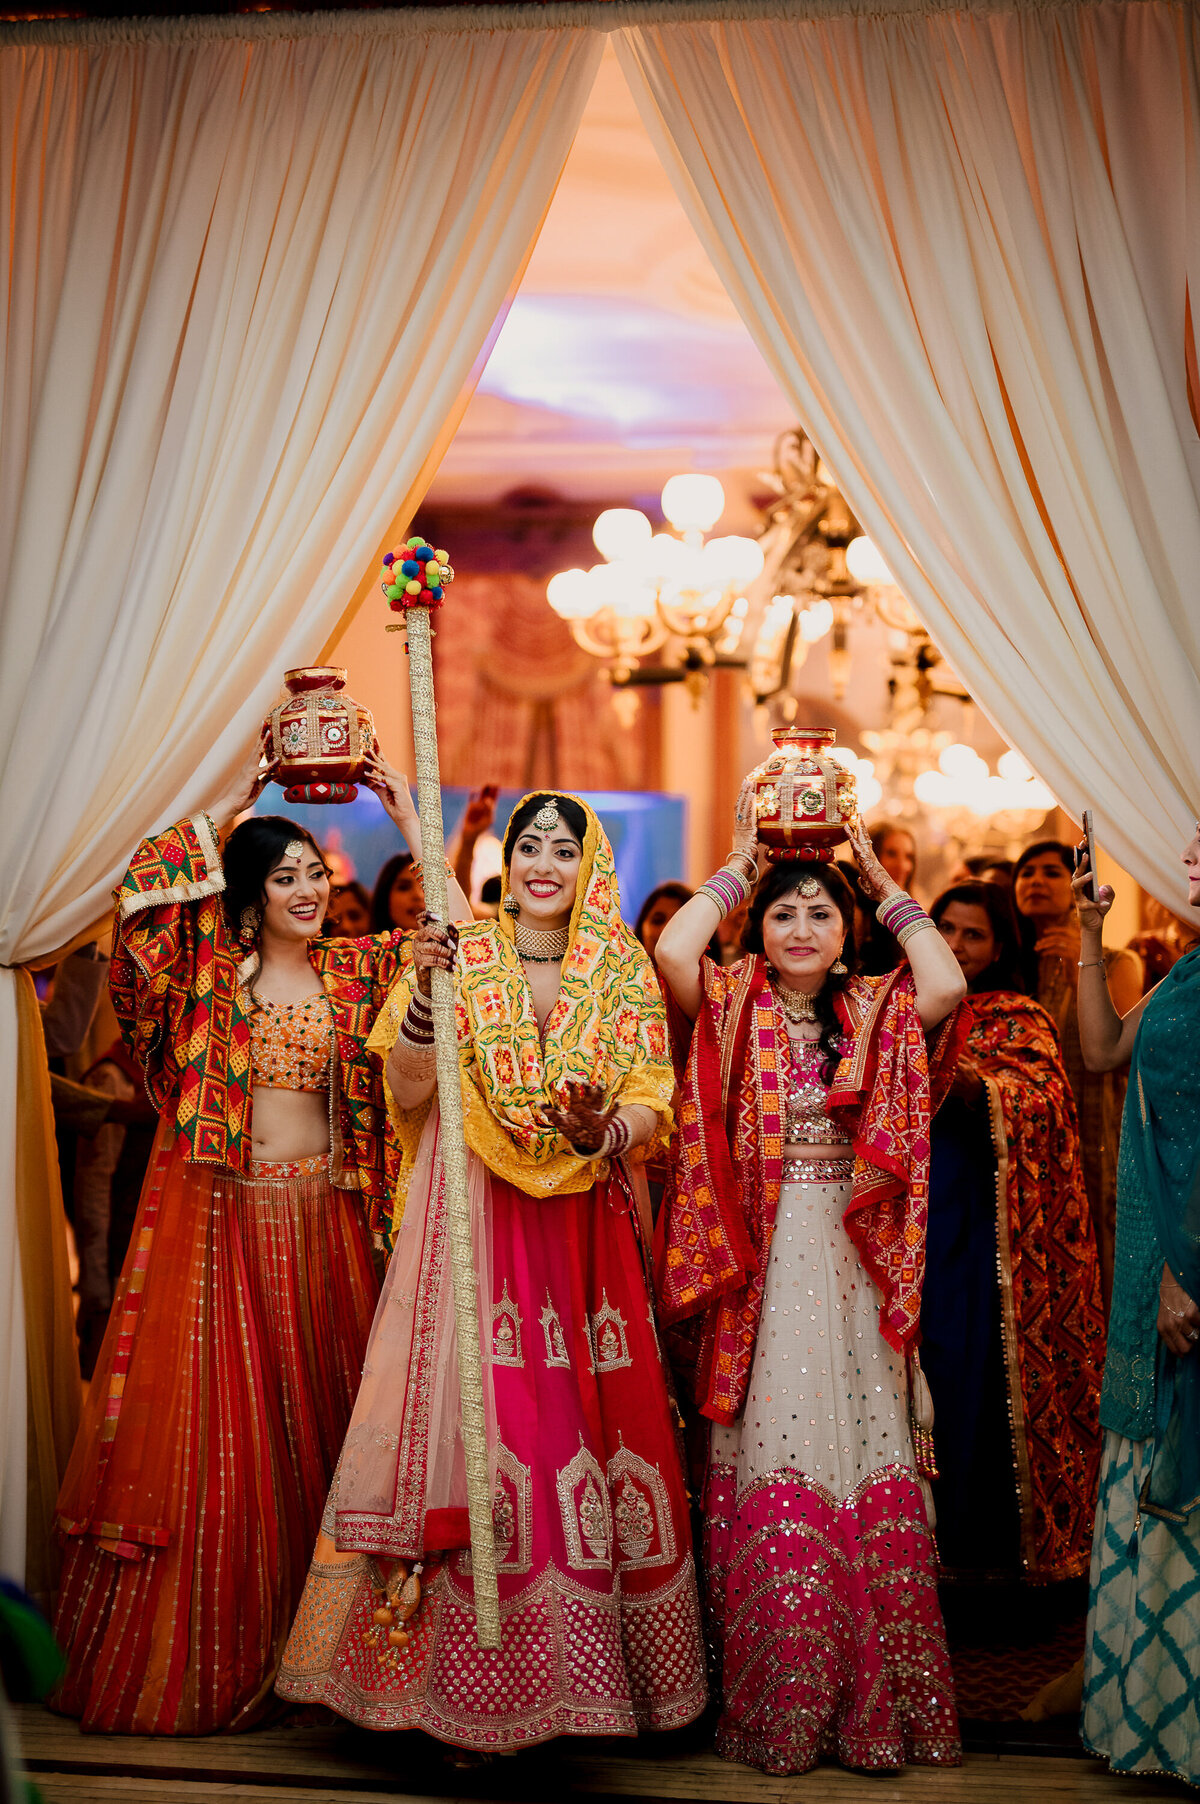 Ishan Fotografi in Hamburg, NJ is a top-rated Indian wedding photographer with over 90 five stars reviews.